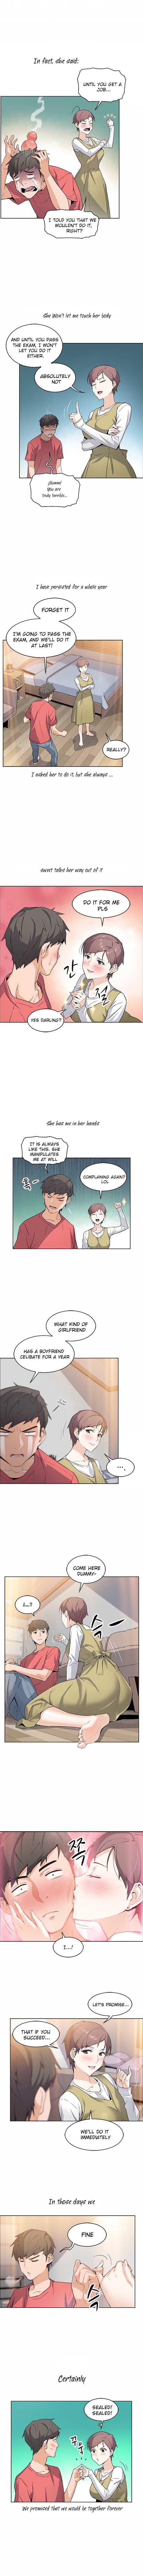 Masturbate Housekeeper [Neck Pillow, Paper] Ch.49/49 [English] [Manhwa PDF] Completed Blowjob Contest - Page 7